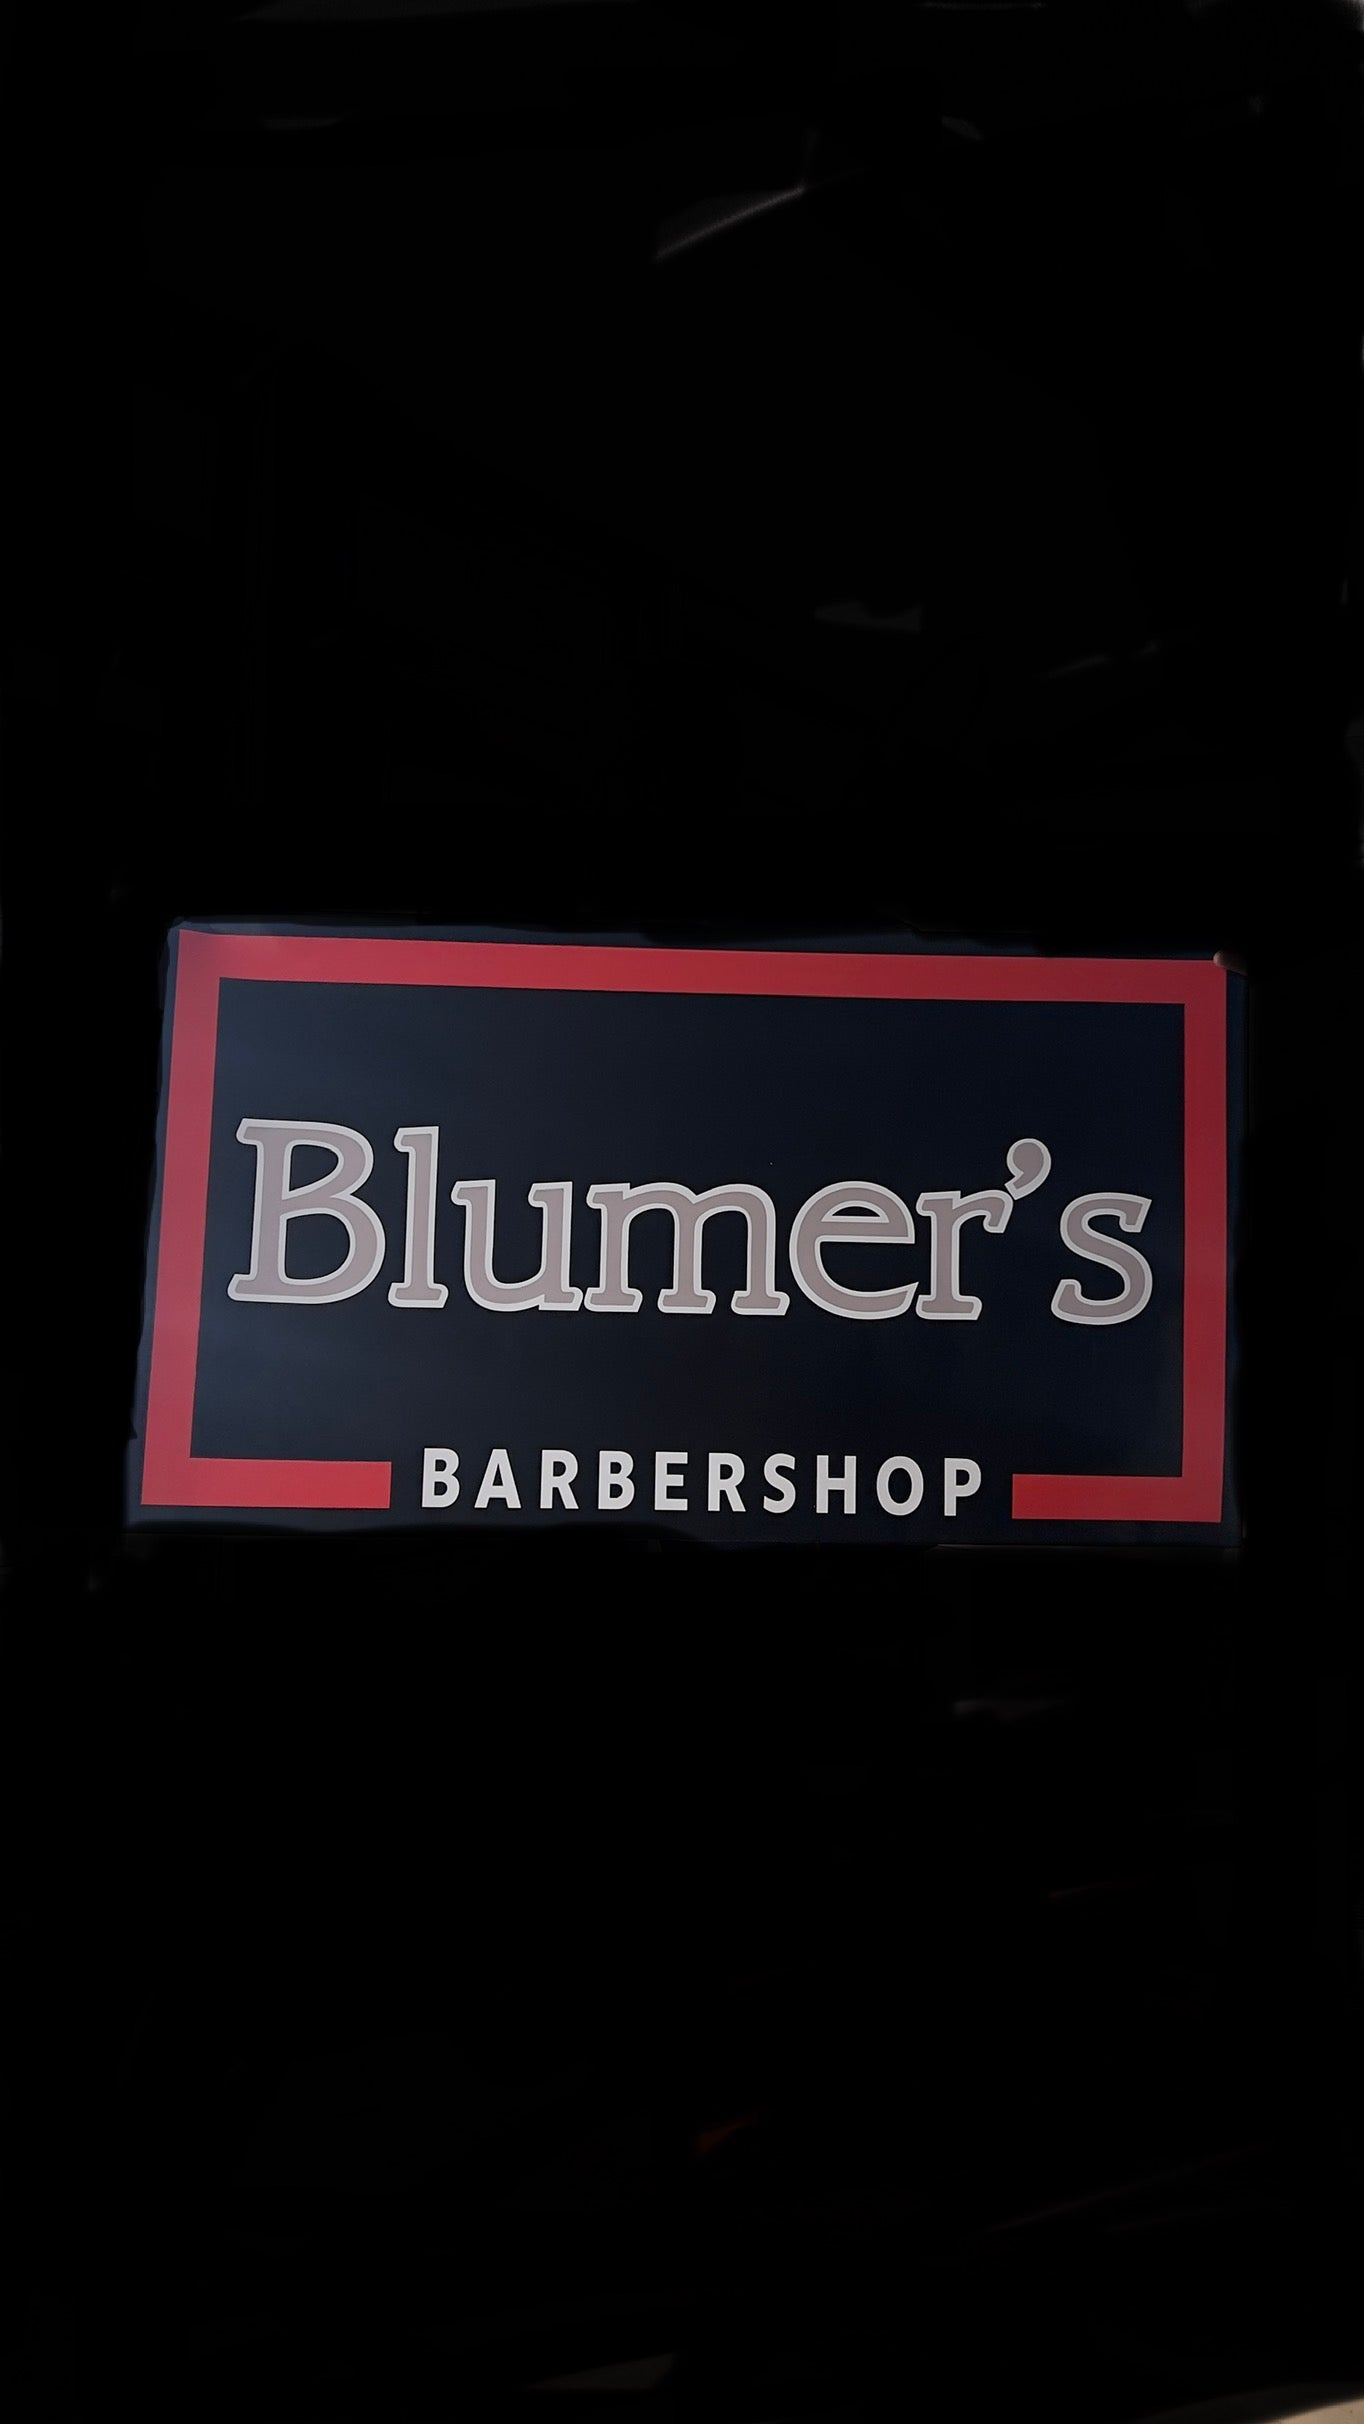 Blumer's Barbershop, aiming to open on Main Street by end of the